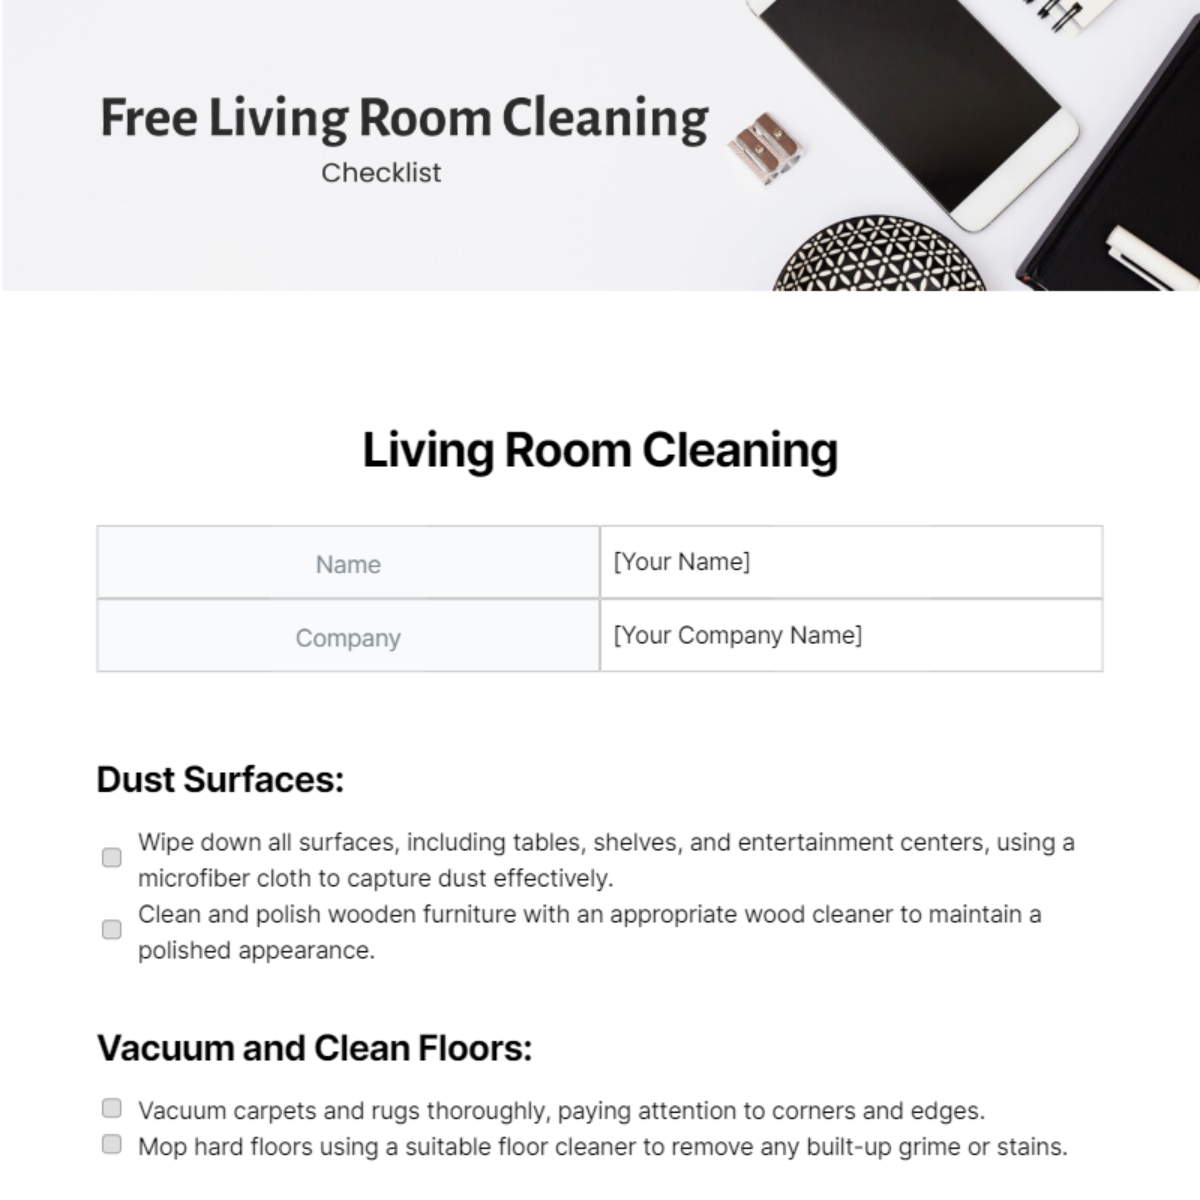 Living Room Cleaning Checklist Template